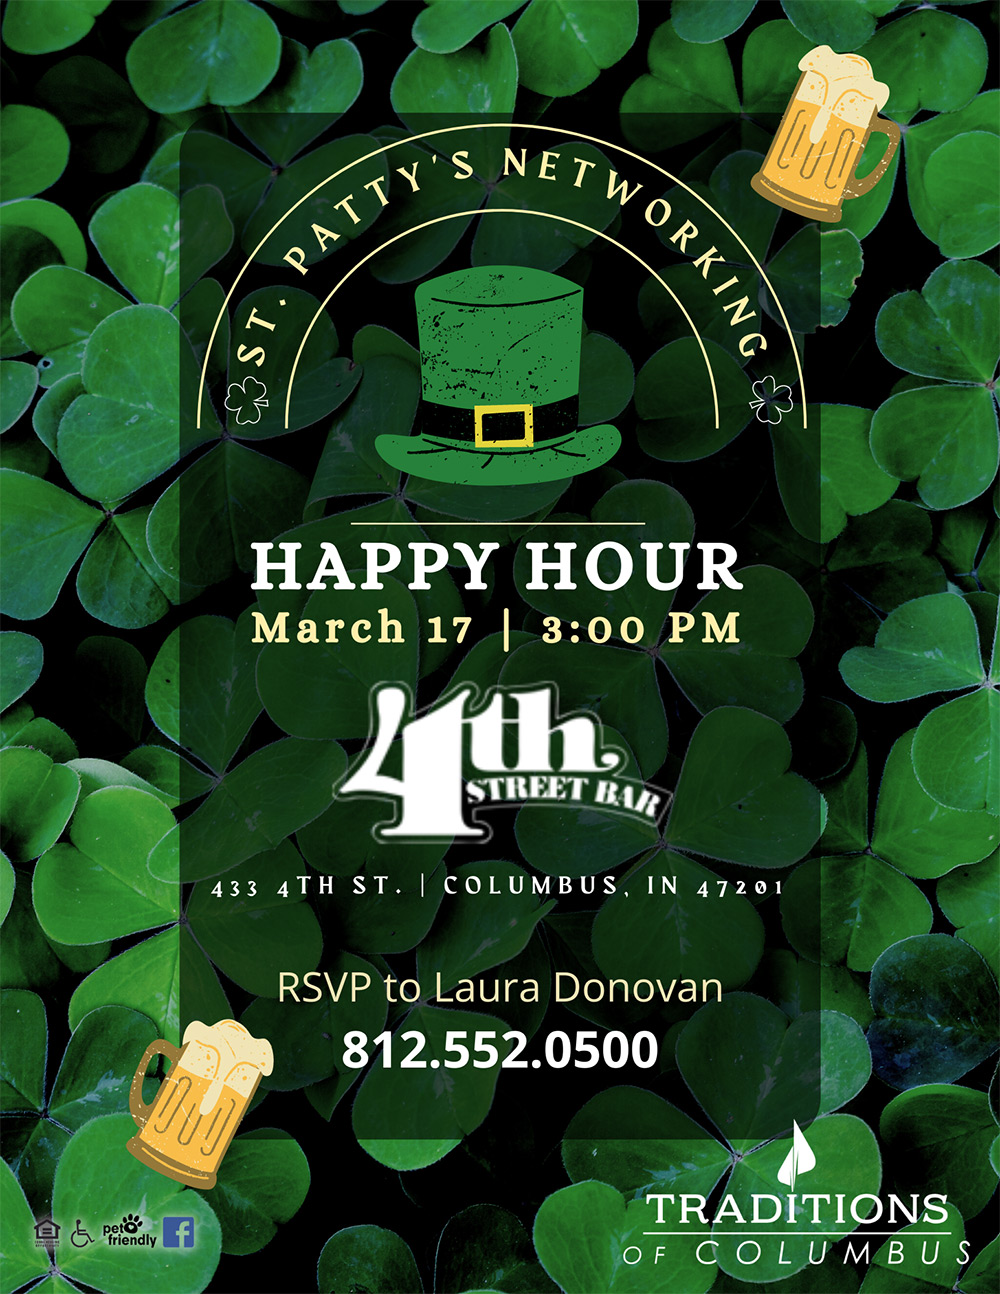 St. Patty's Networking Happy Hour